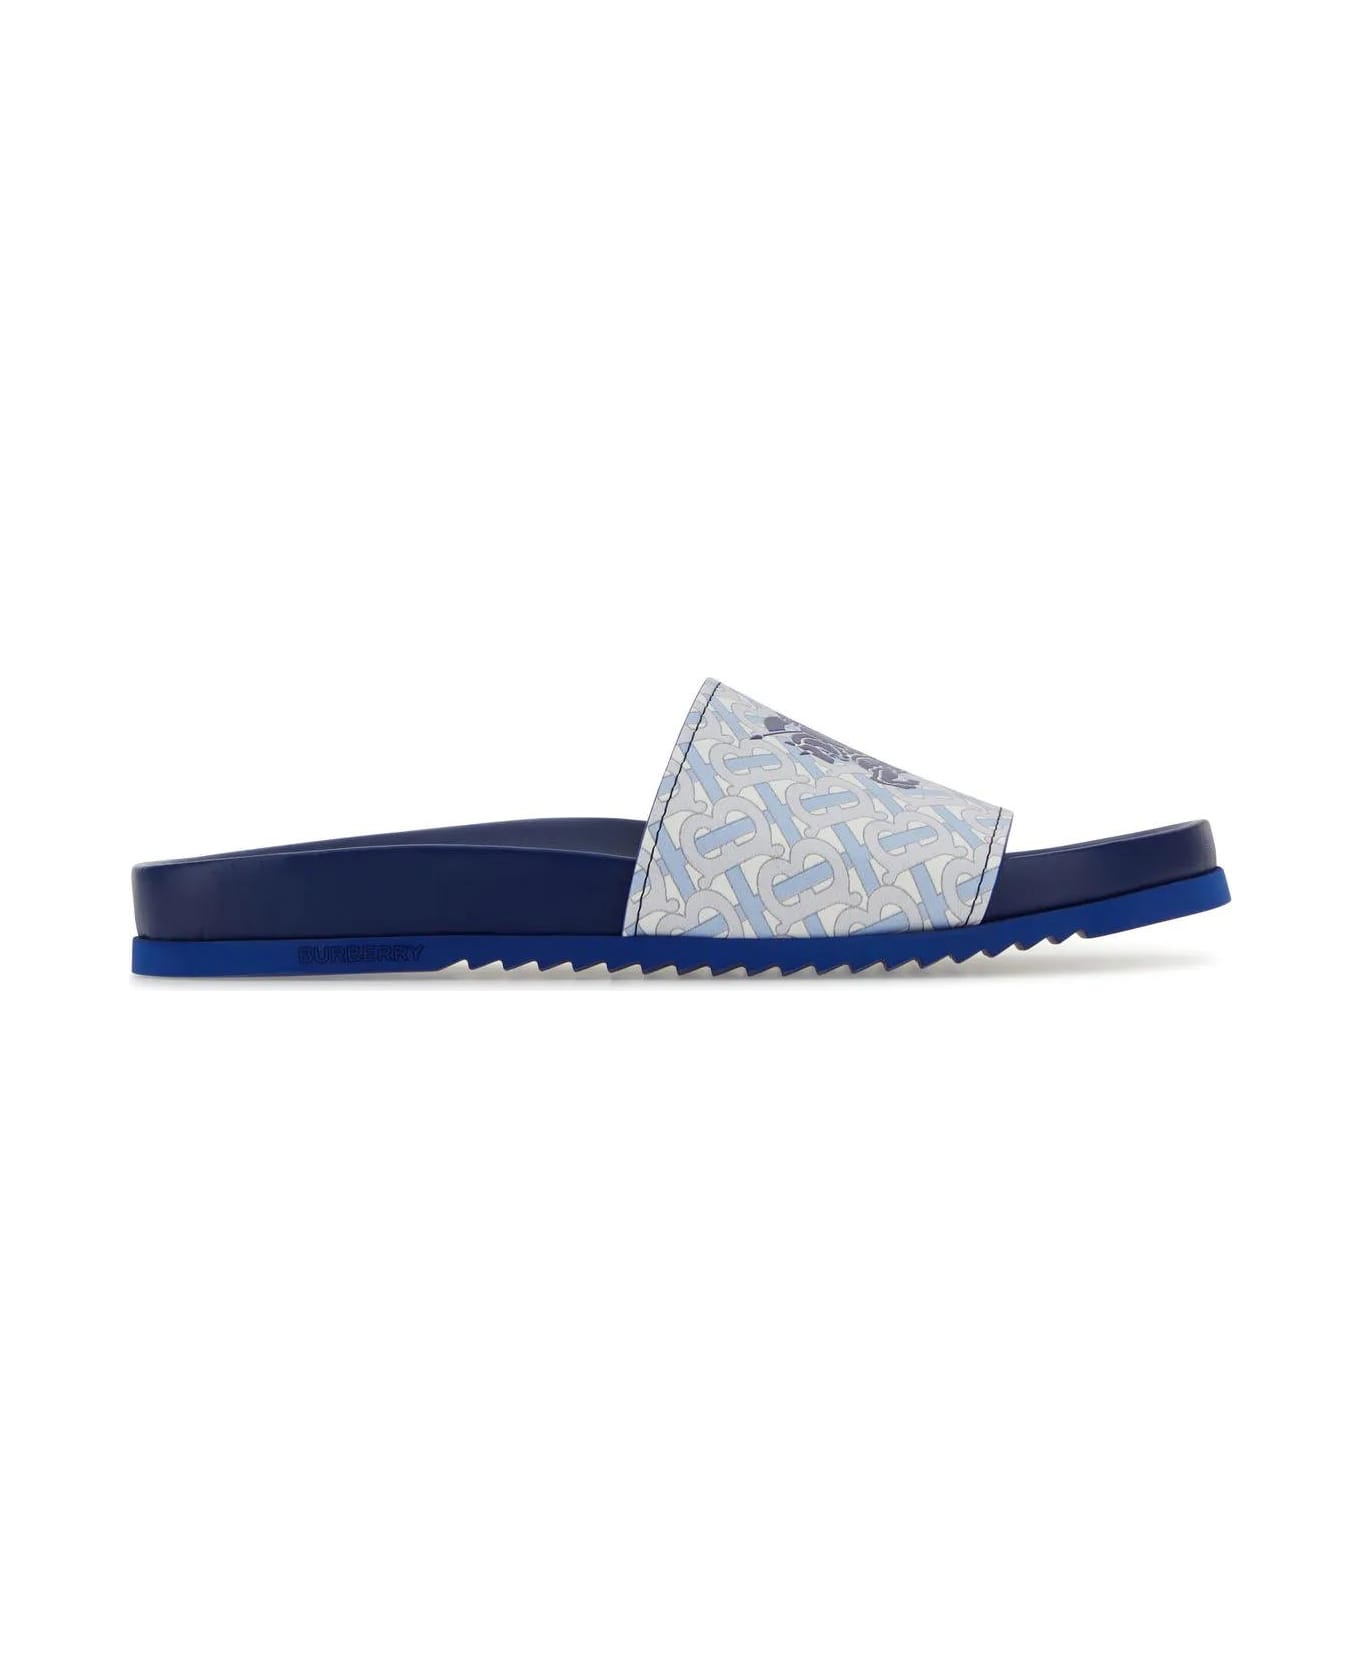 Burberry Printed Leather Slippers - Blue その他各種シューズ